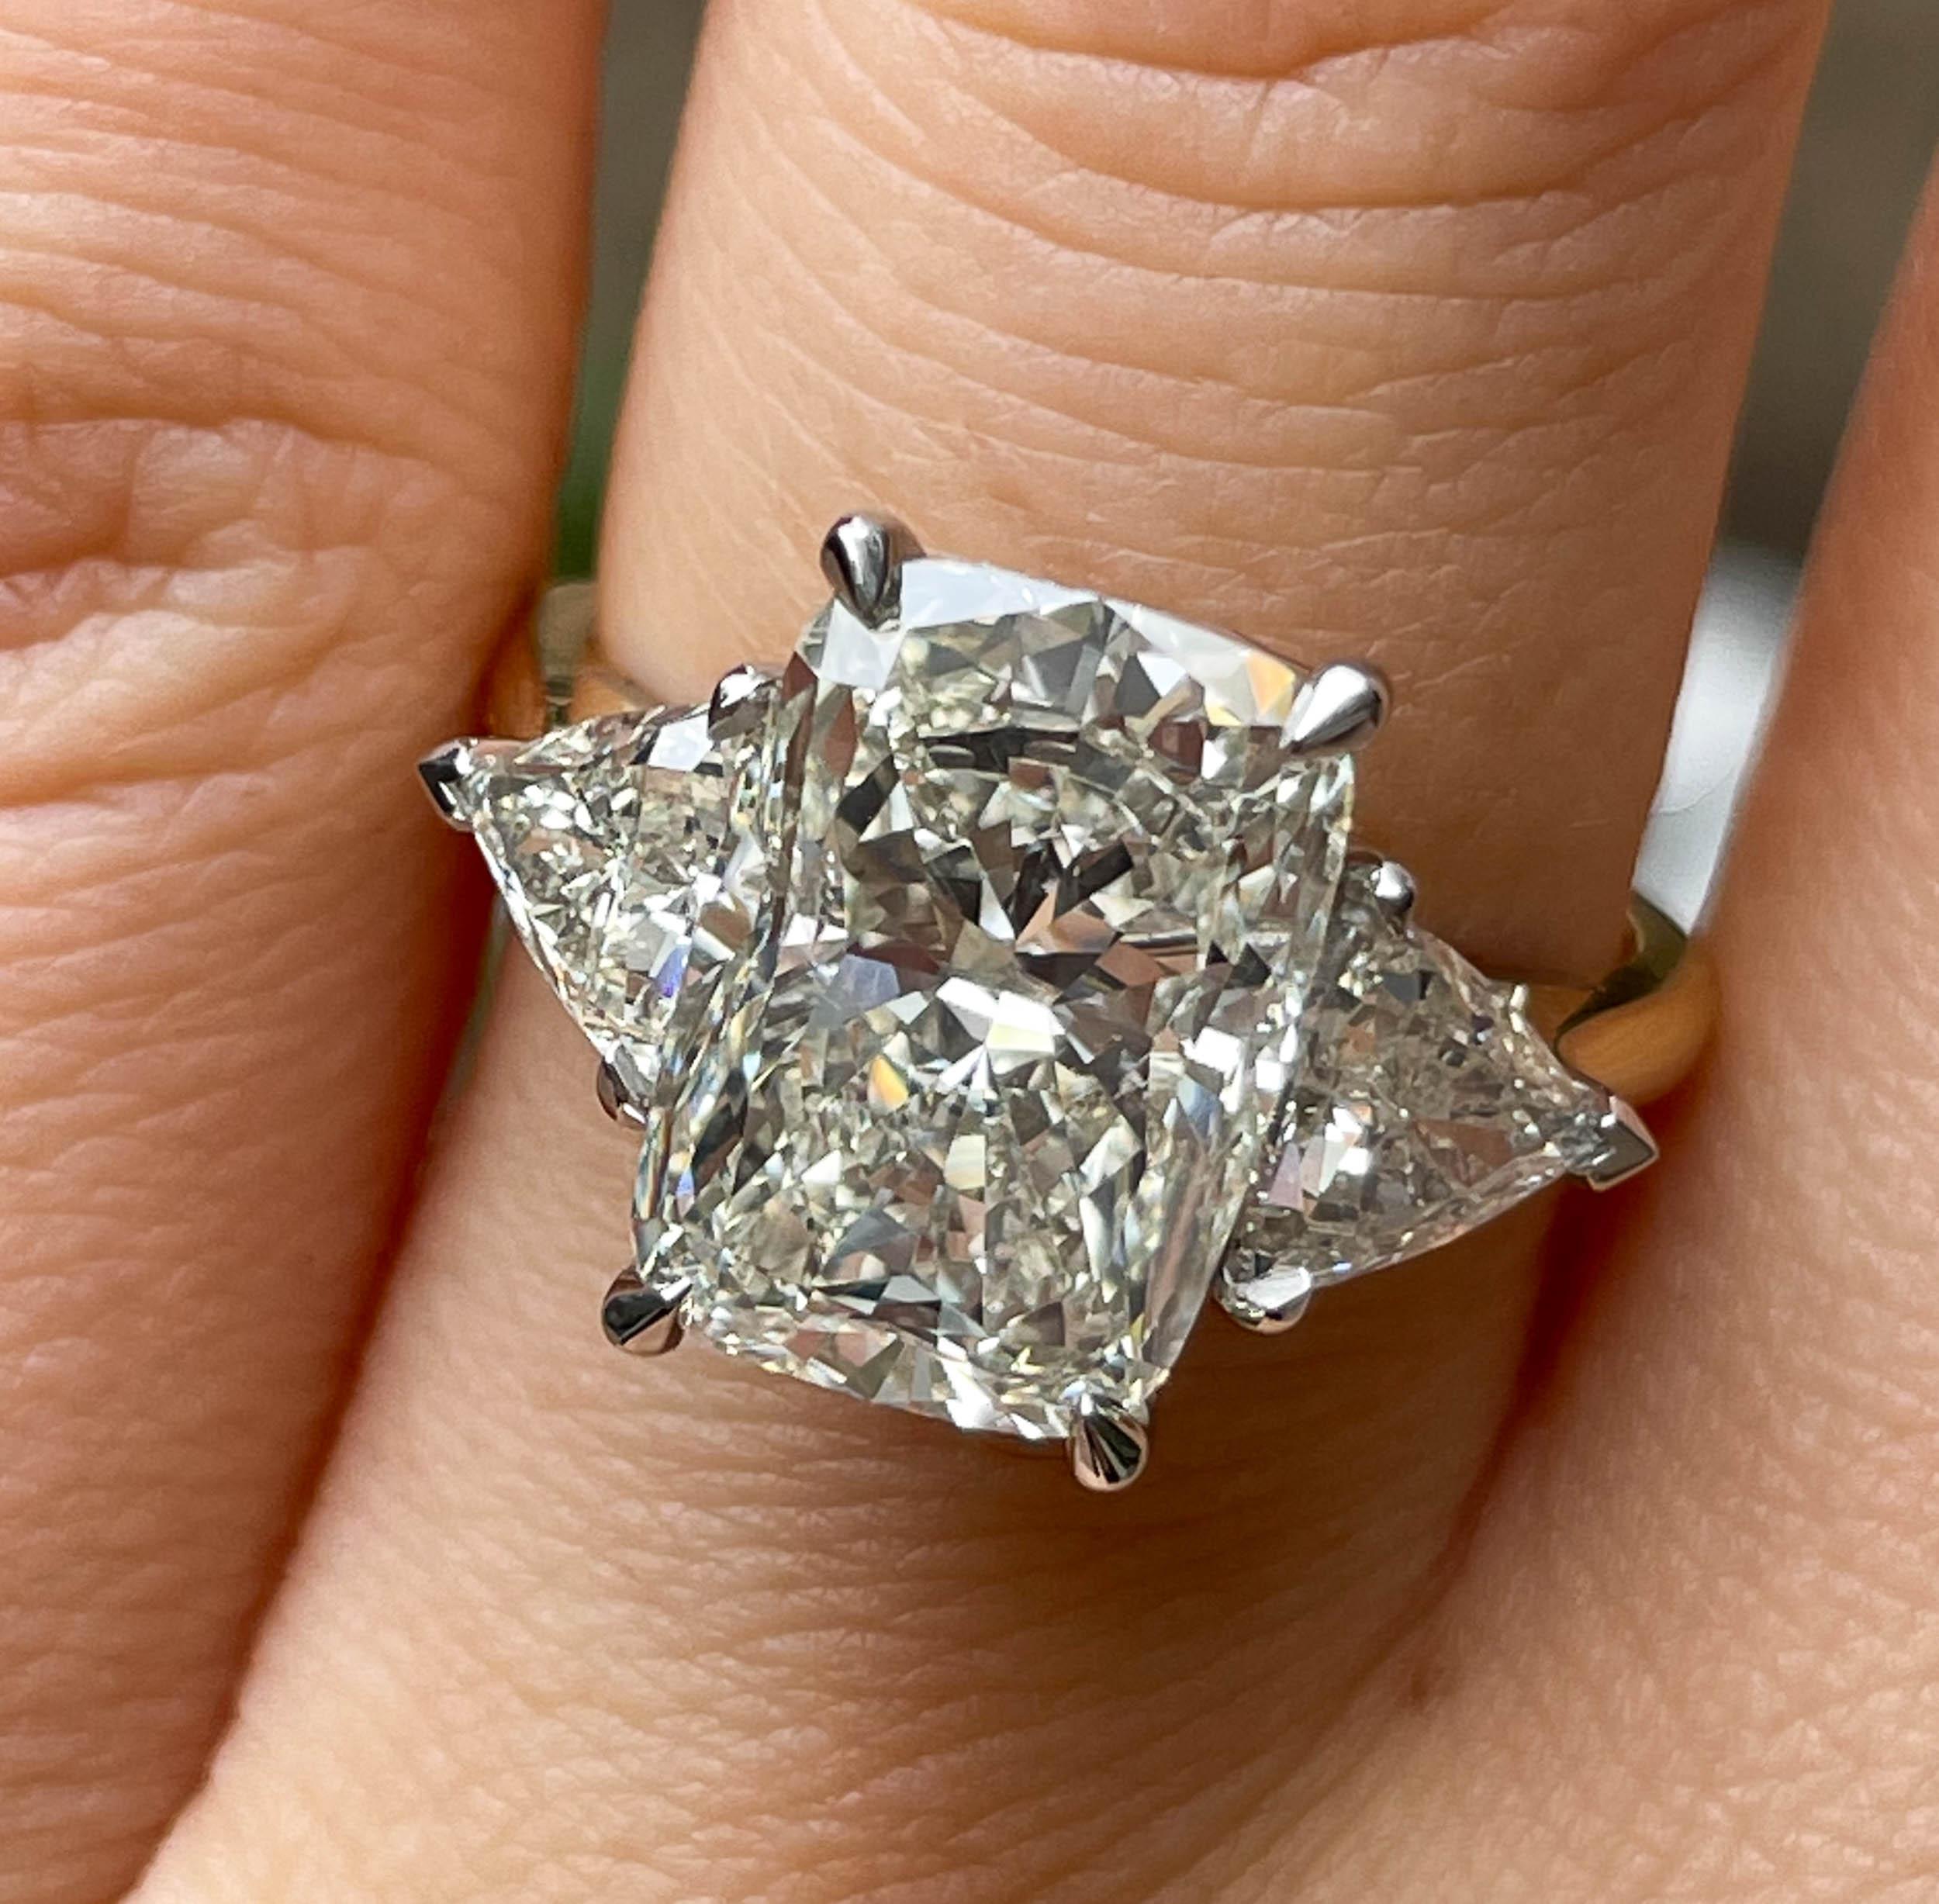 A Breathtaking Estate HANDMADE Platinum/18k Yellow Gold (stamped) Cushion Diamond Three-Stone Engagement ring contains GIA certified 4.13ct Cushion cut center diamond in M color and SI2 clarity; with measurements of 11.47x8.17x5.63mm. GIA report #